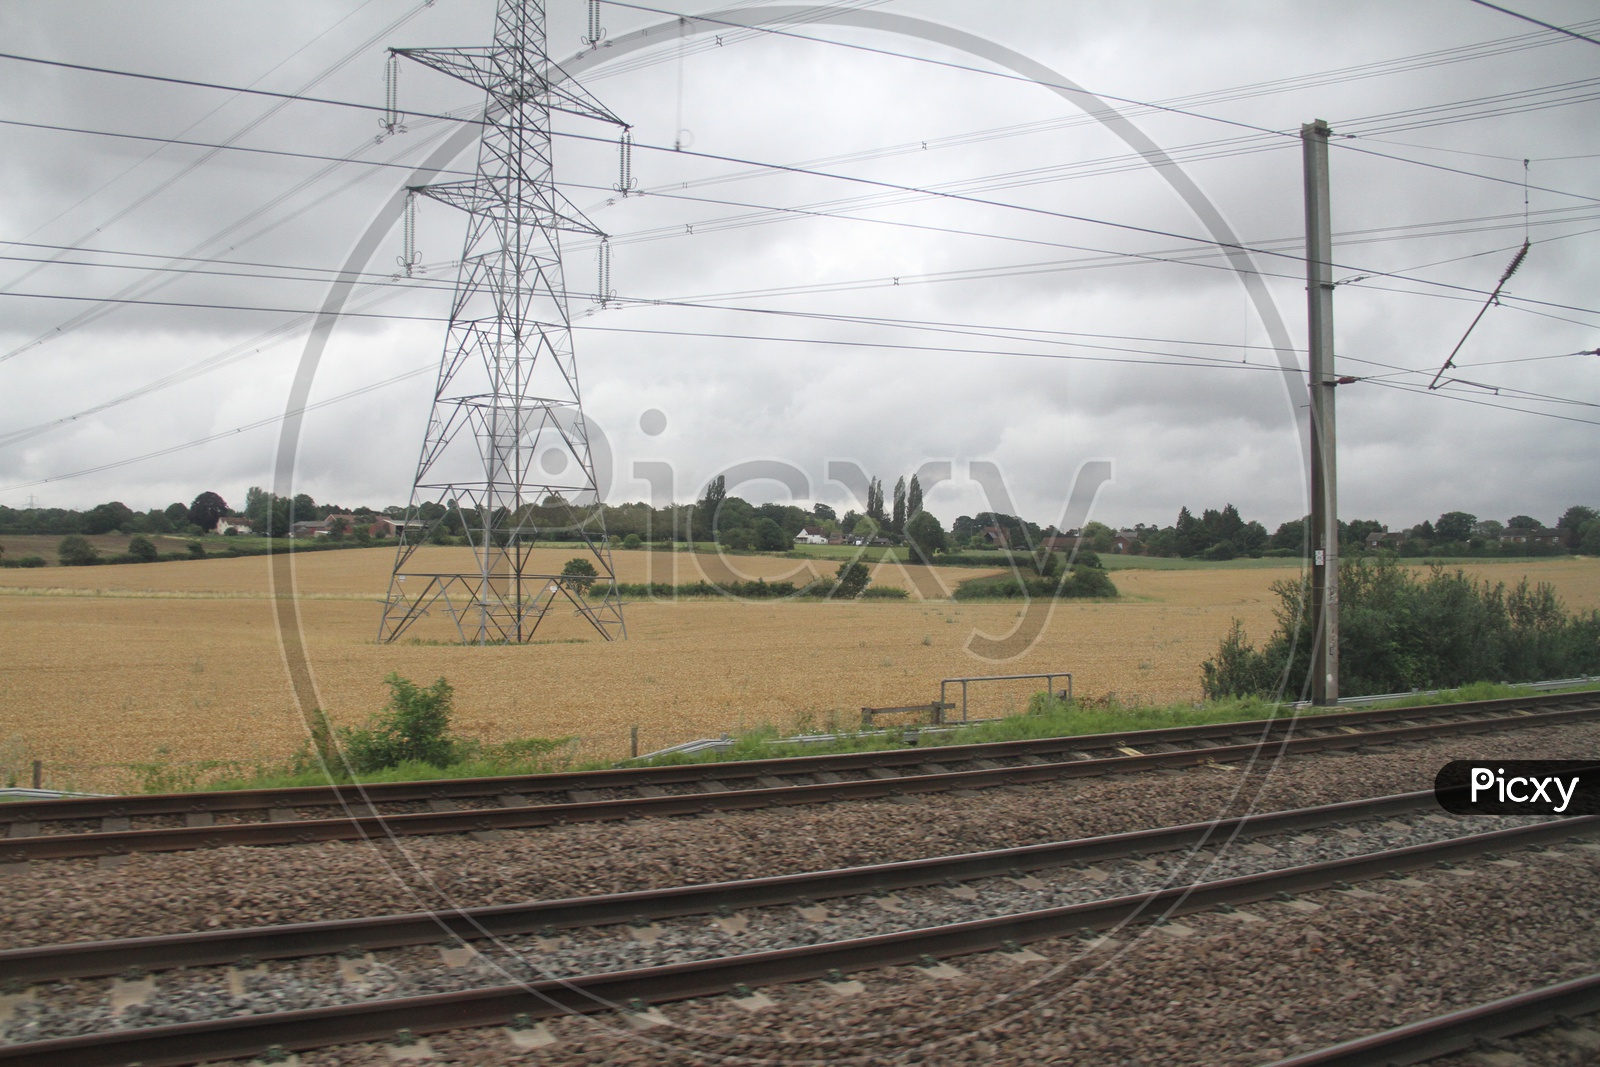 Power Transmission Lines in Agriculture Fields near Railway Tracks